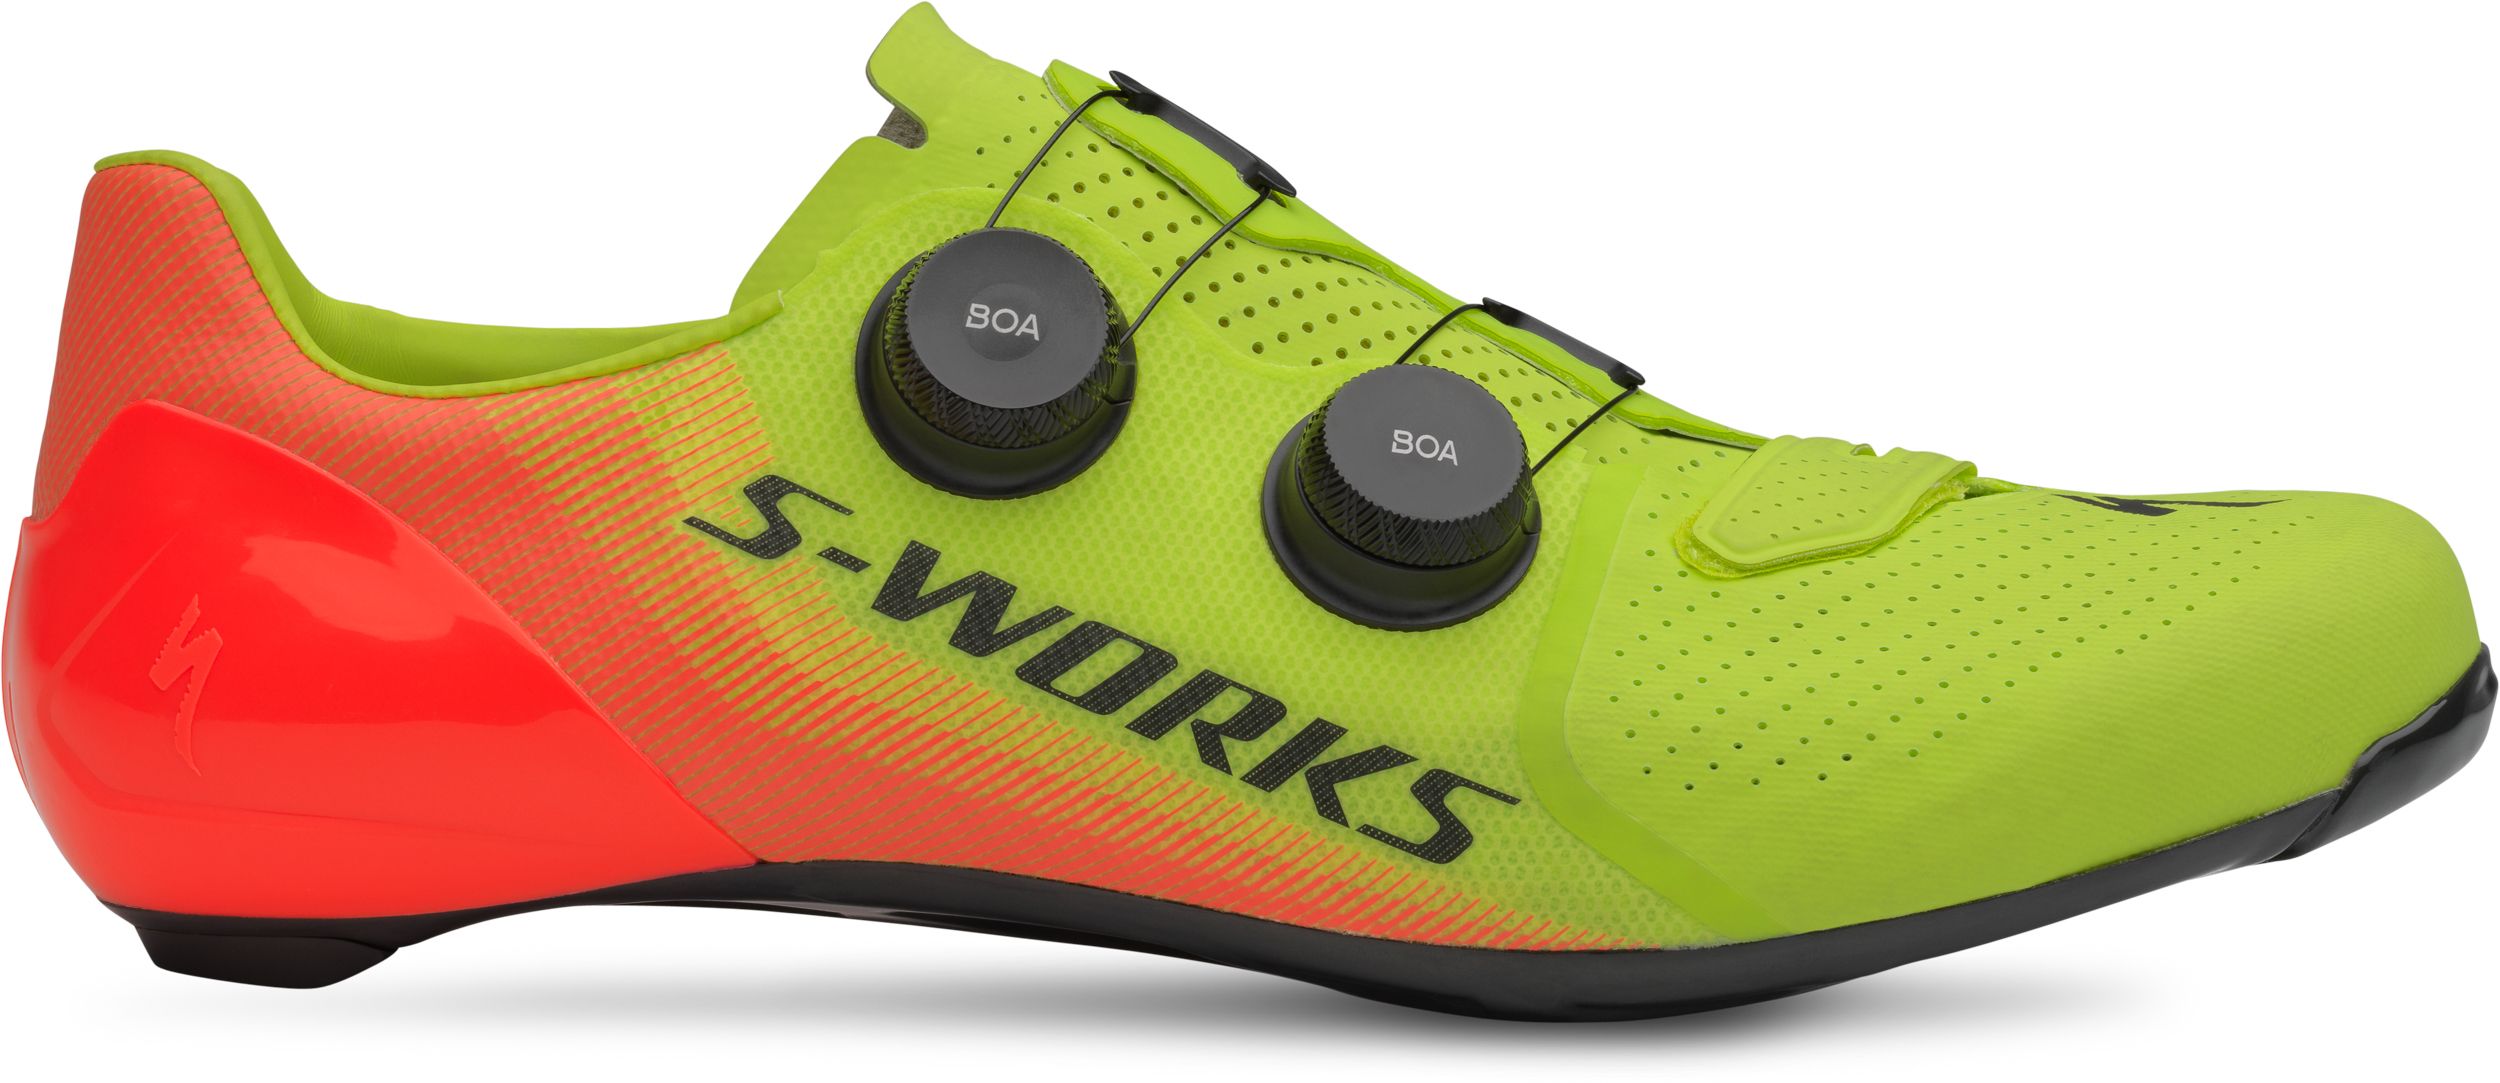 Genoplive Seletøj Blossom Specialized S-Works 7 - Road Cycling Shoe​ | Bicycling